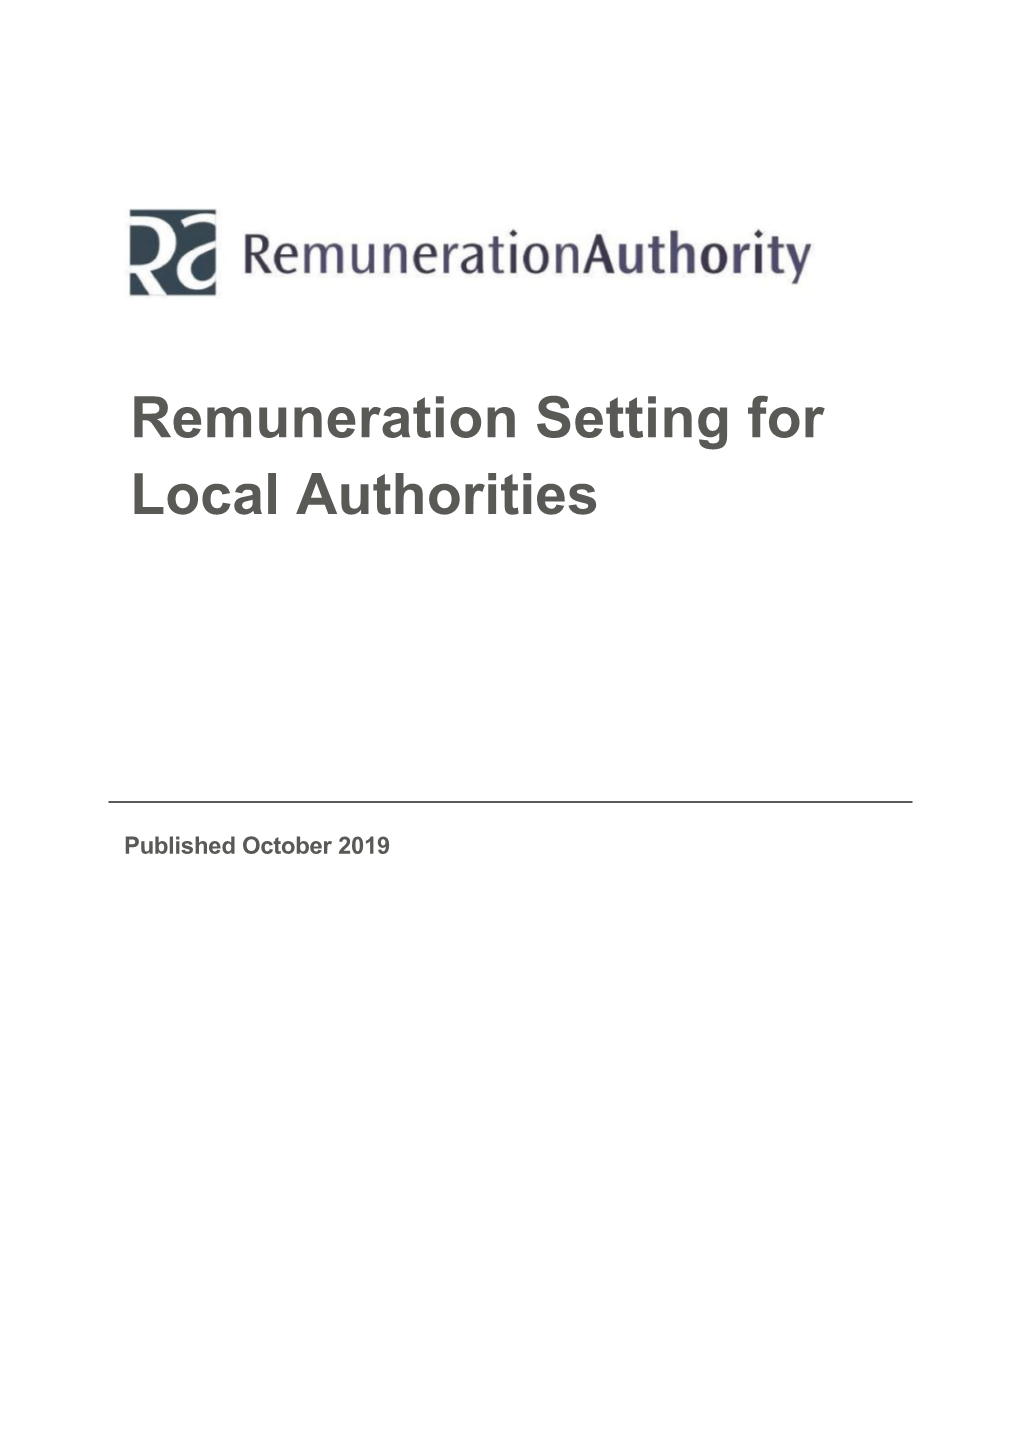 Remuneration Setting for Local Authorities